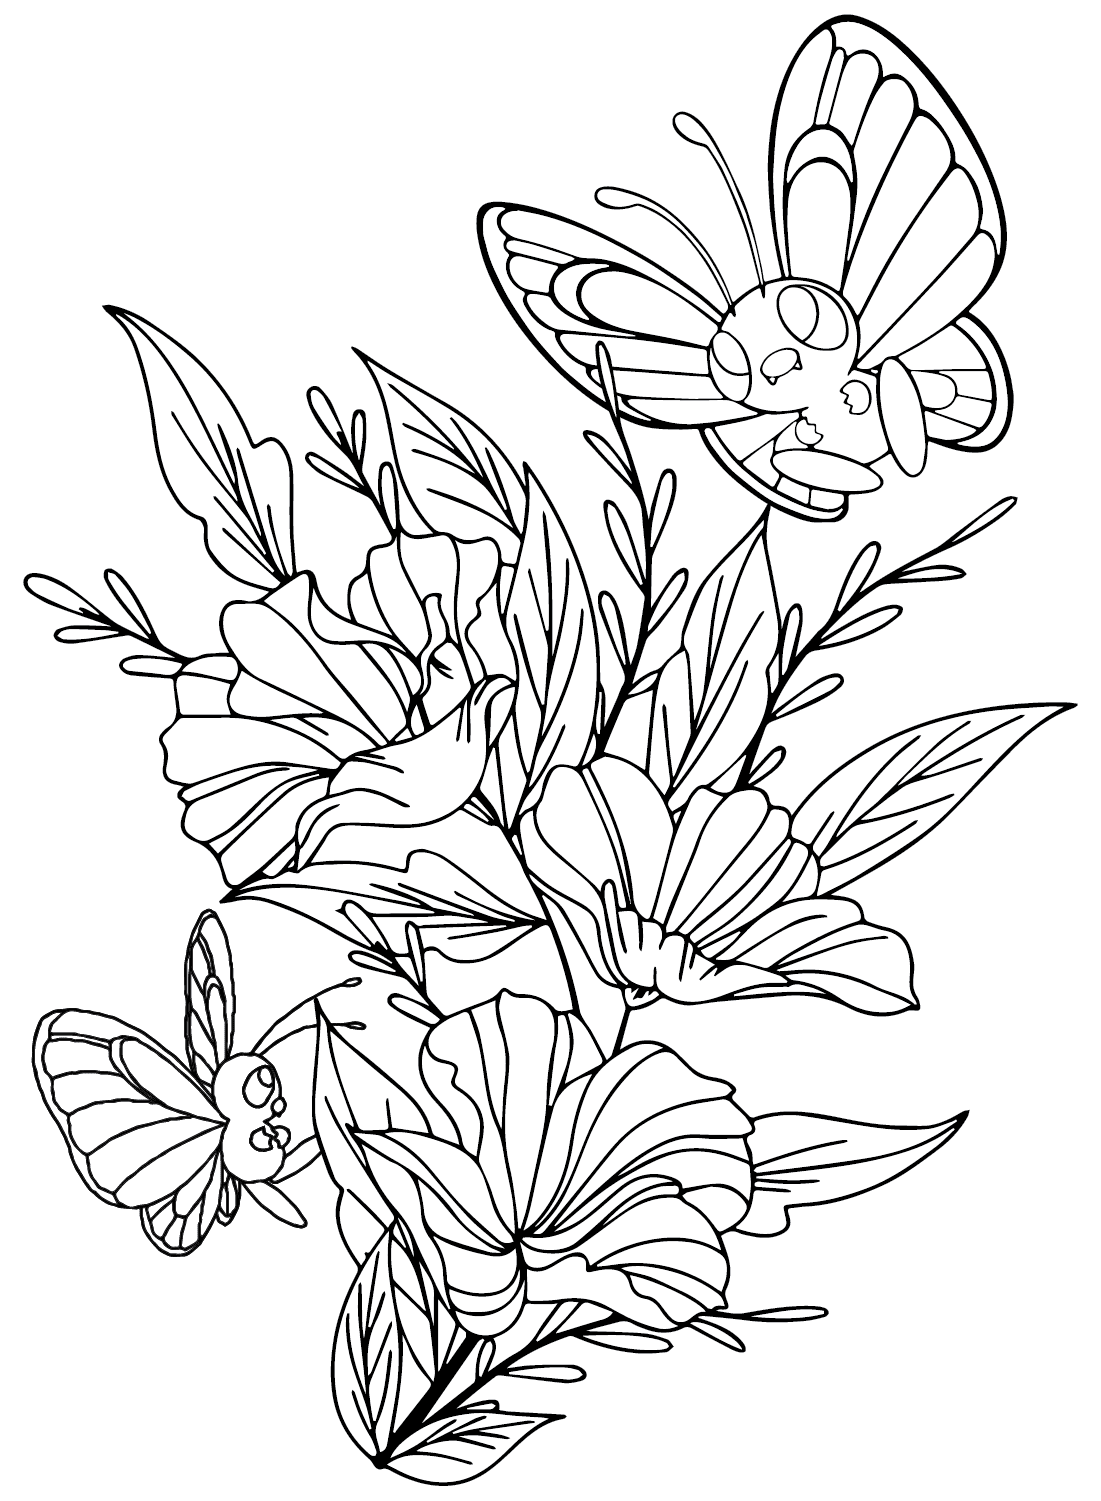 Butterfree Coloring Pages to Printable from Butterfree